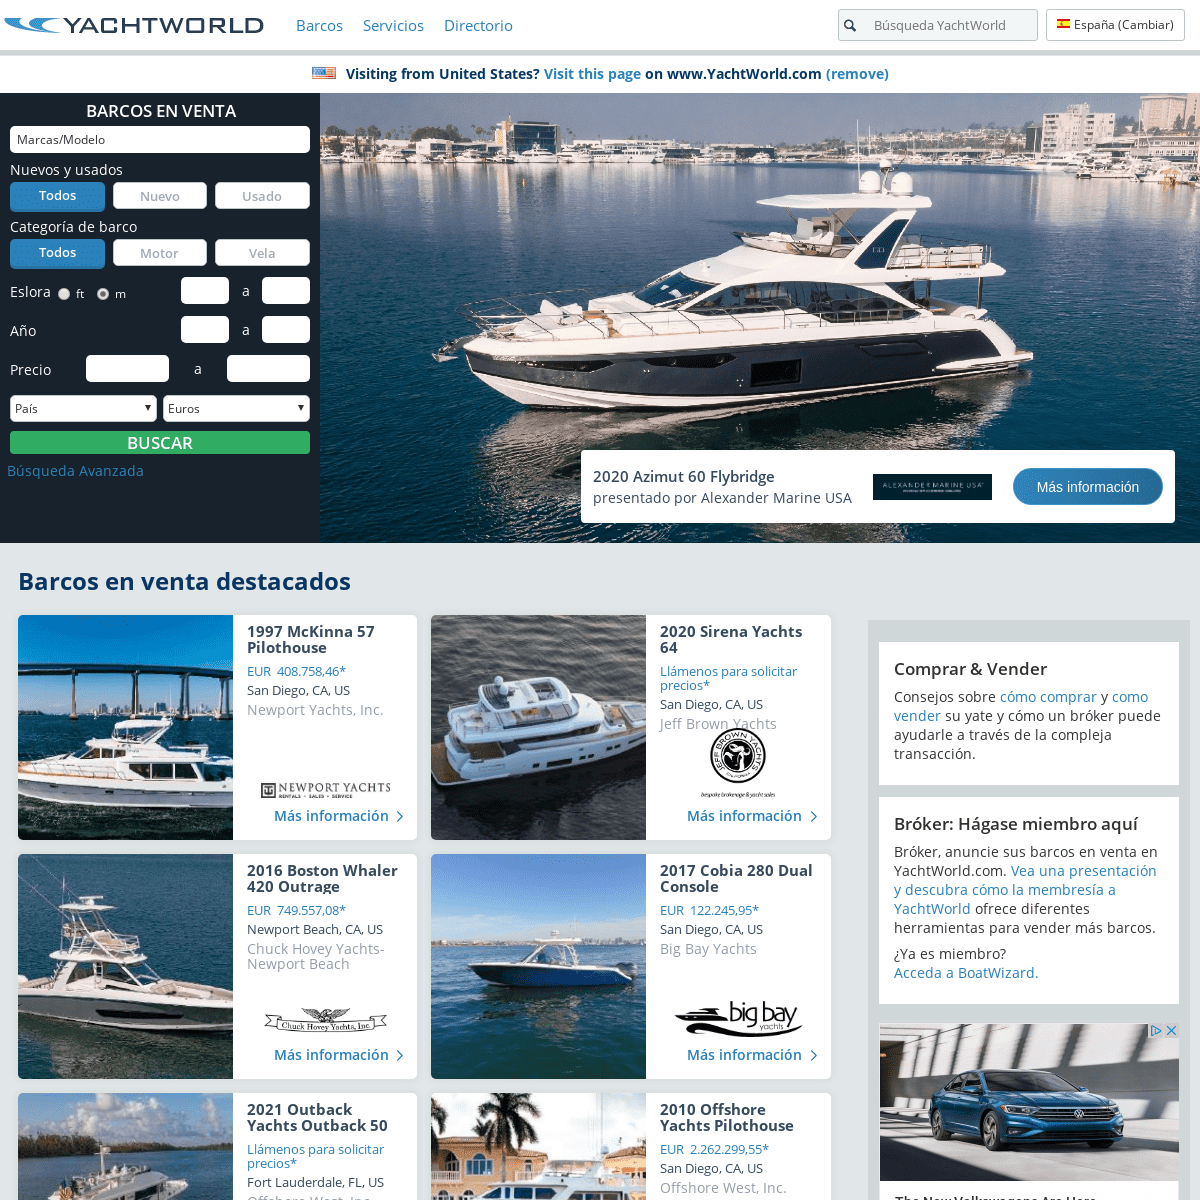 A complete backup of yachtworld.es